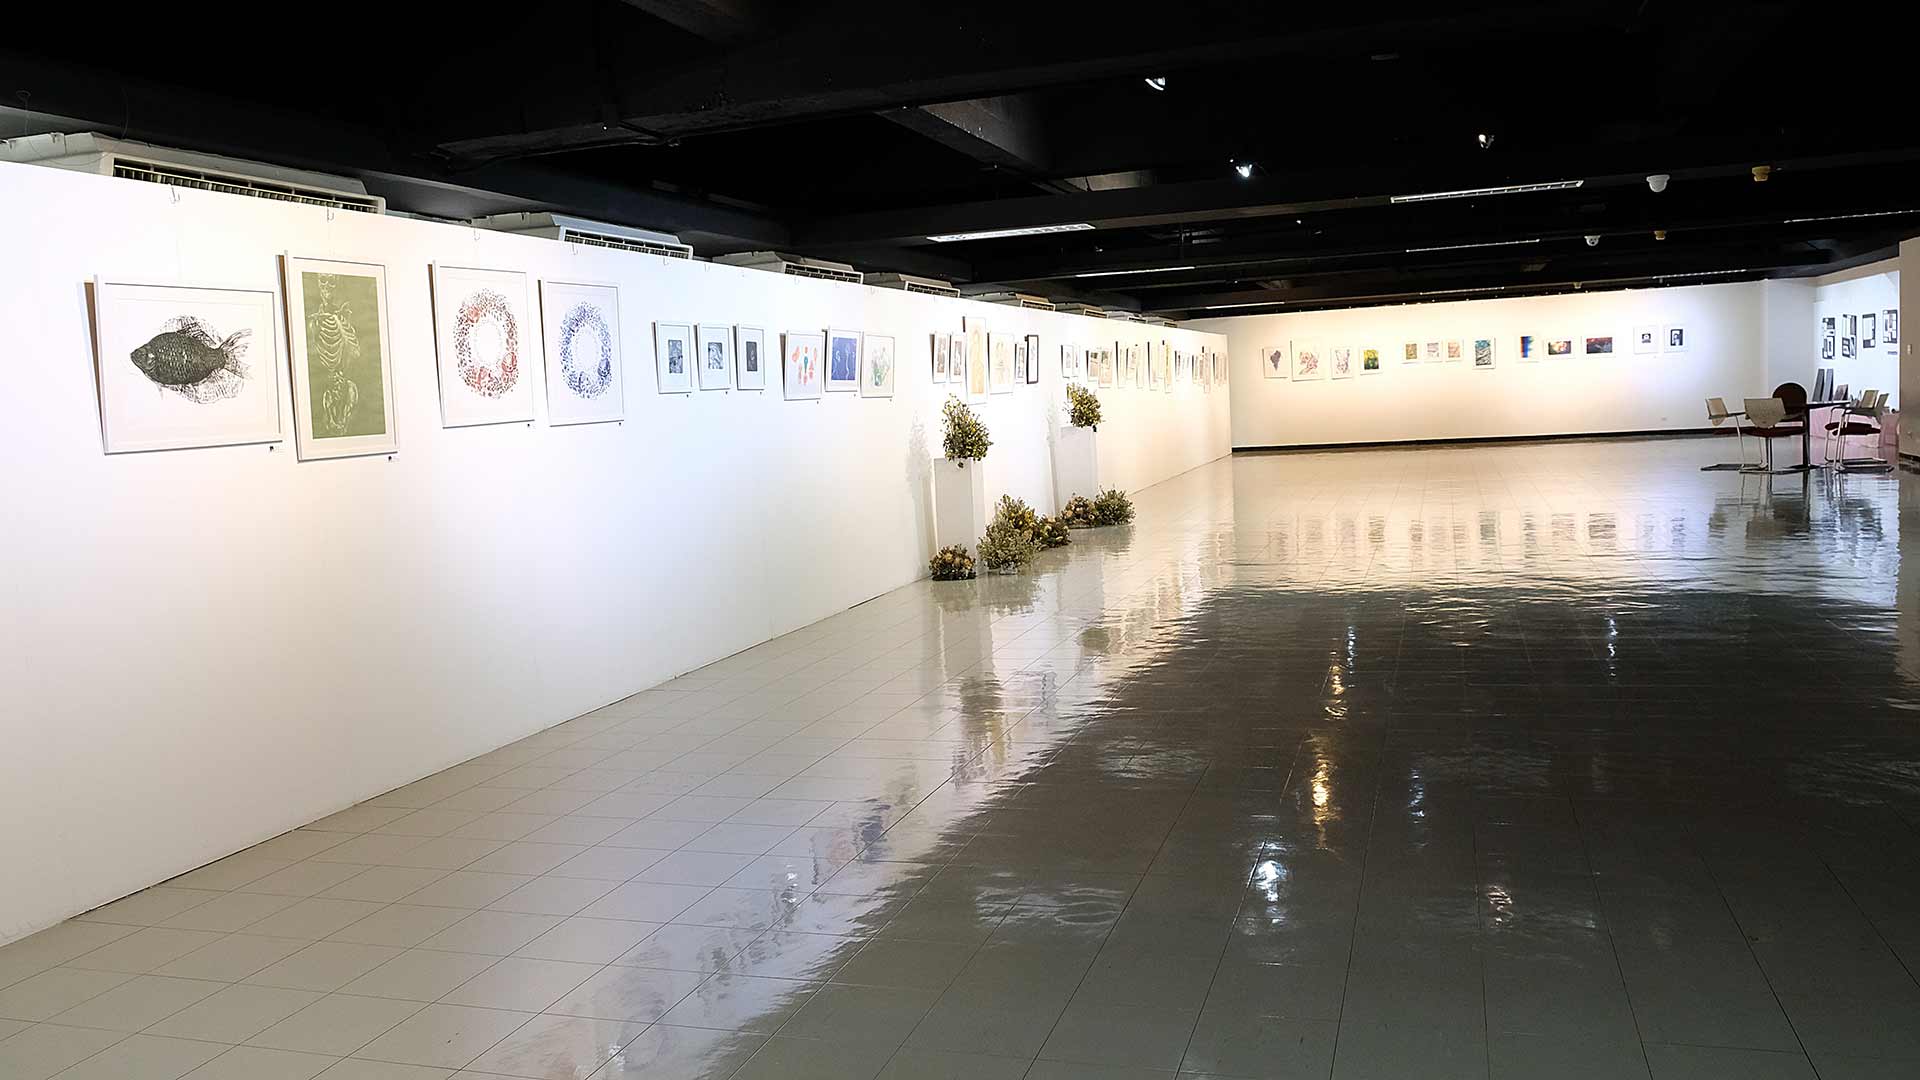 FIRST EDITION,Printmaking Exhibition By ARTED47 | ผลงานภาพพิมพ์ 